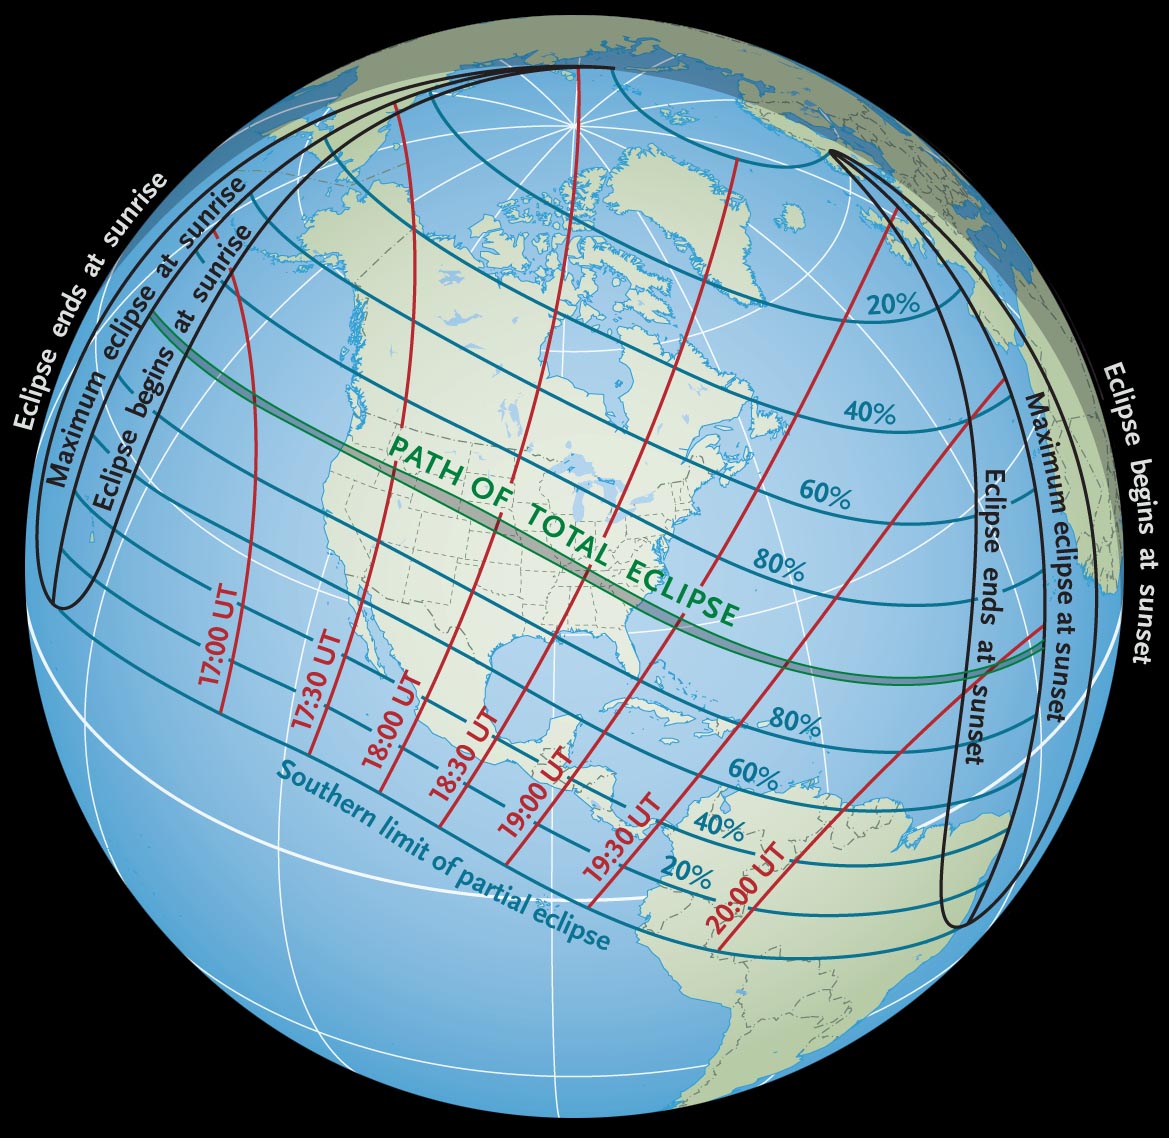 Get Ready for America's Coast-to-Coast Eclipse by Fred Espenak and Jay Anderson